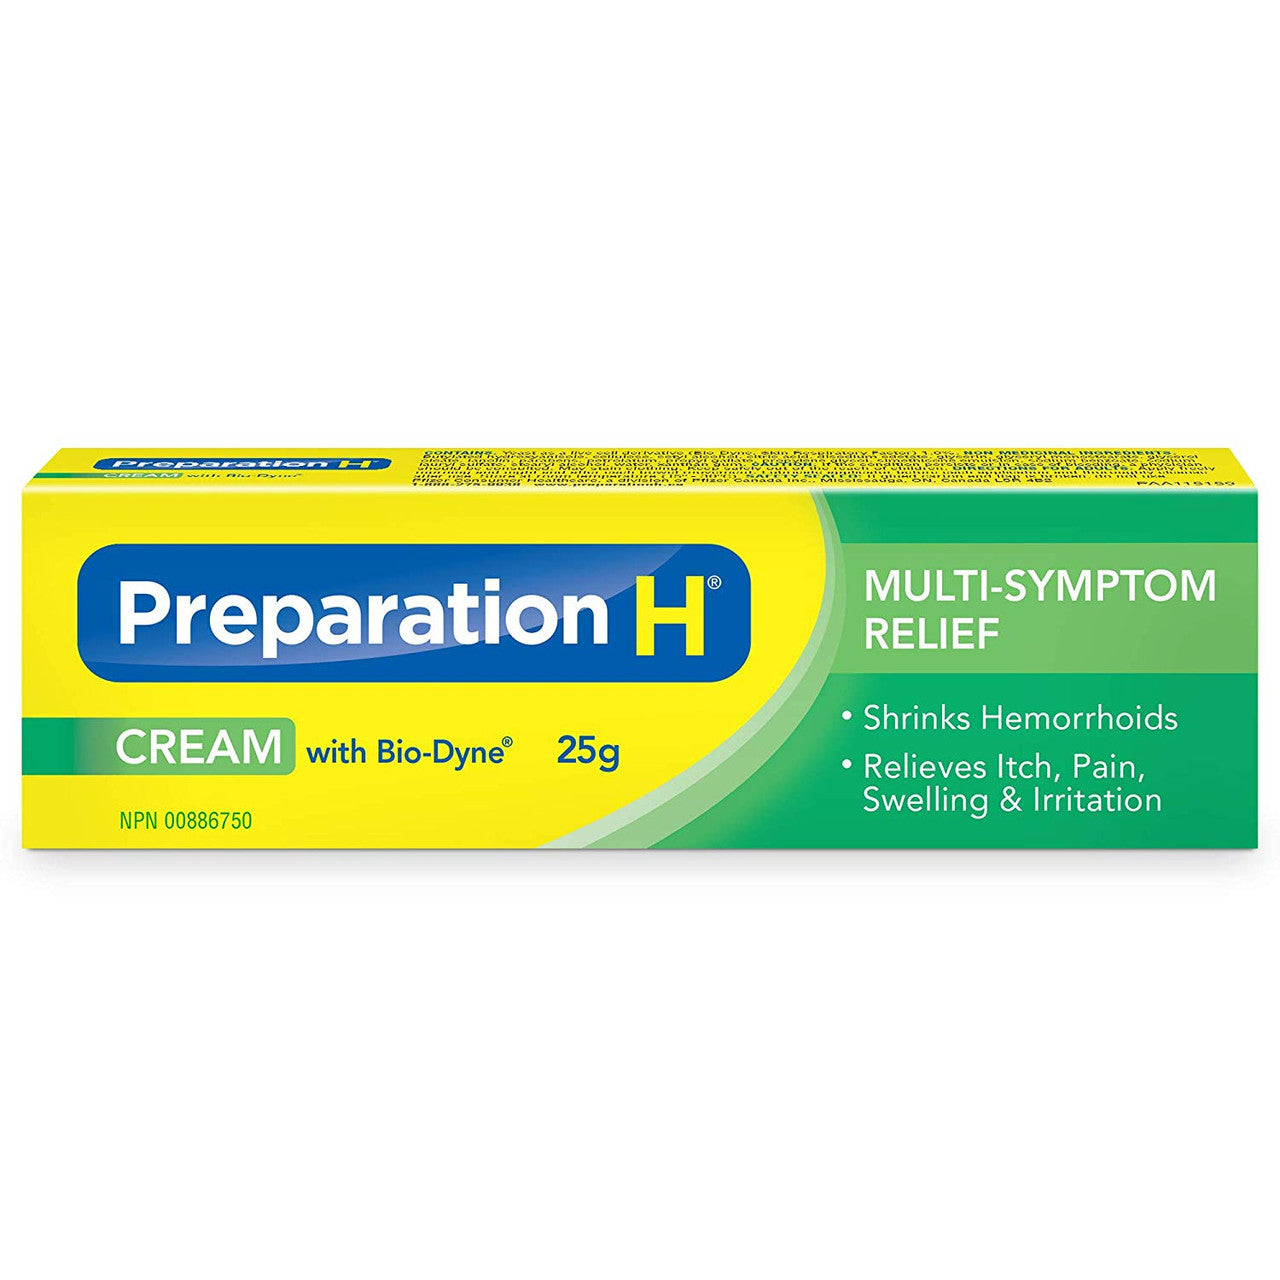 Preparation H Cream(25g) with Bio-Dyne, Hemorrhoid Multi-Symptom Pain Relief {Imported from Canada}